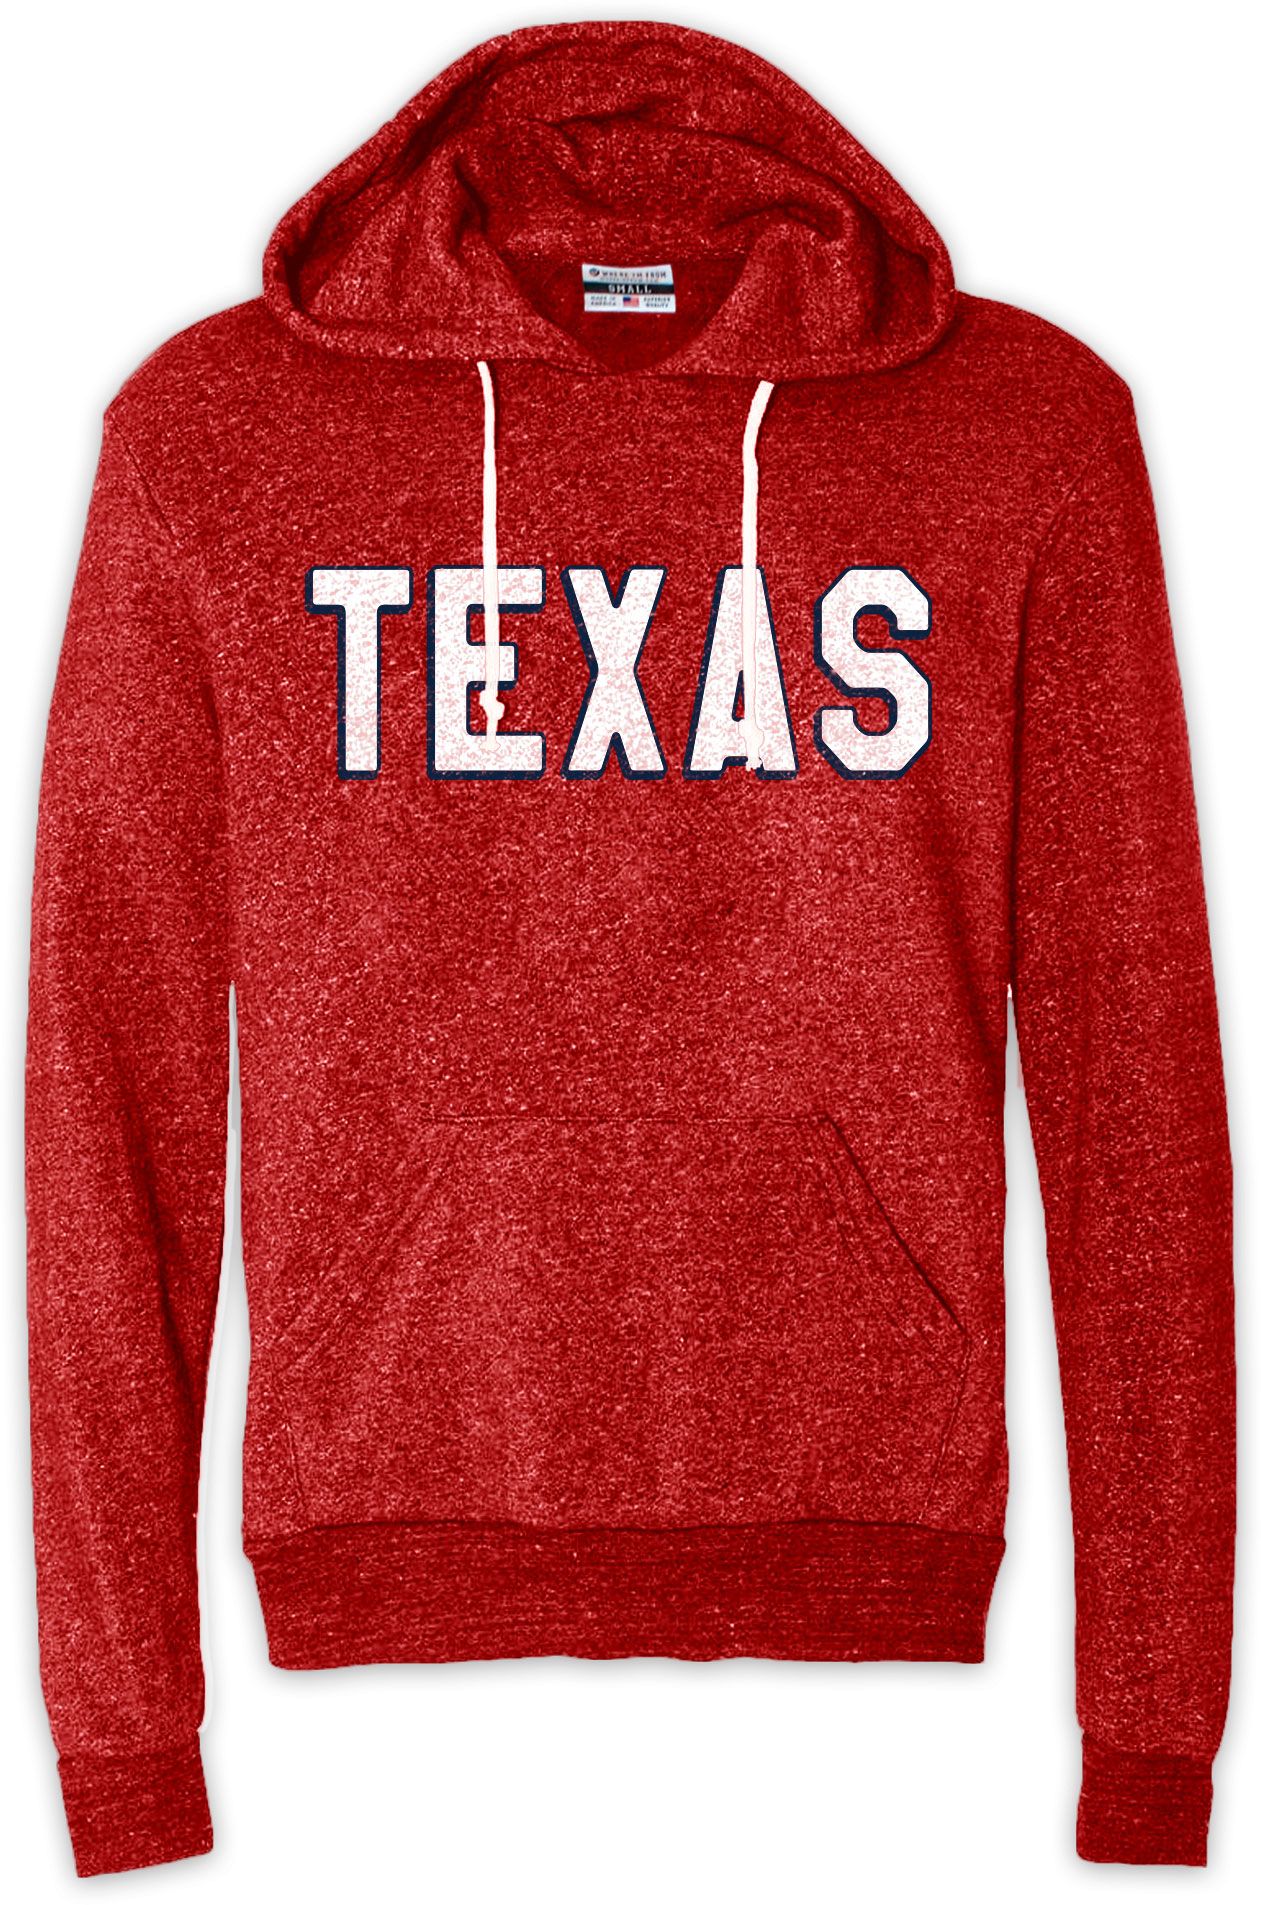 Where I'm From Texas Red Block Hoodie